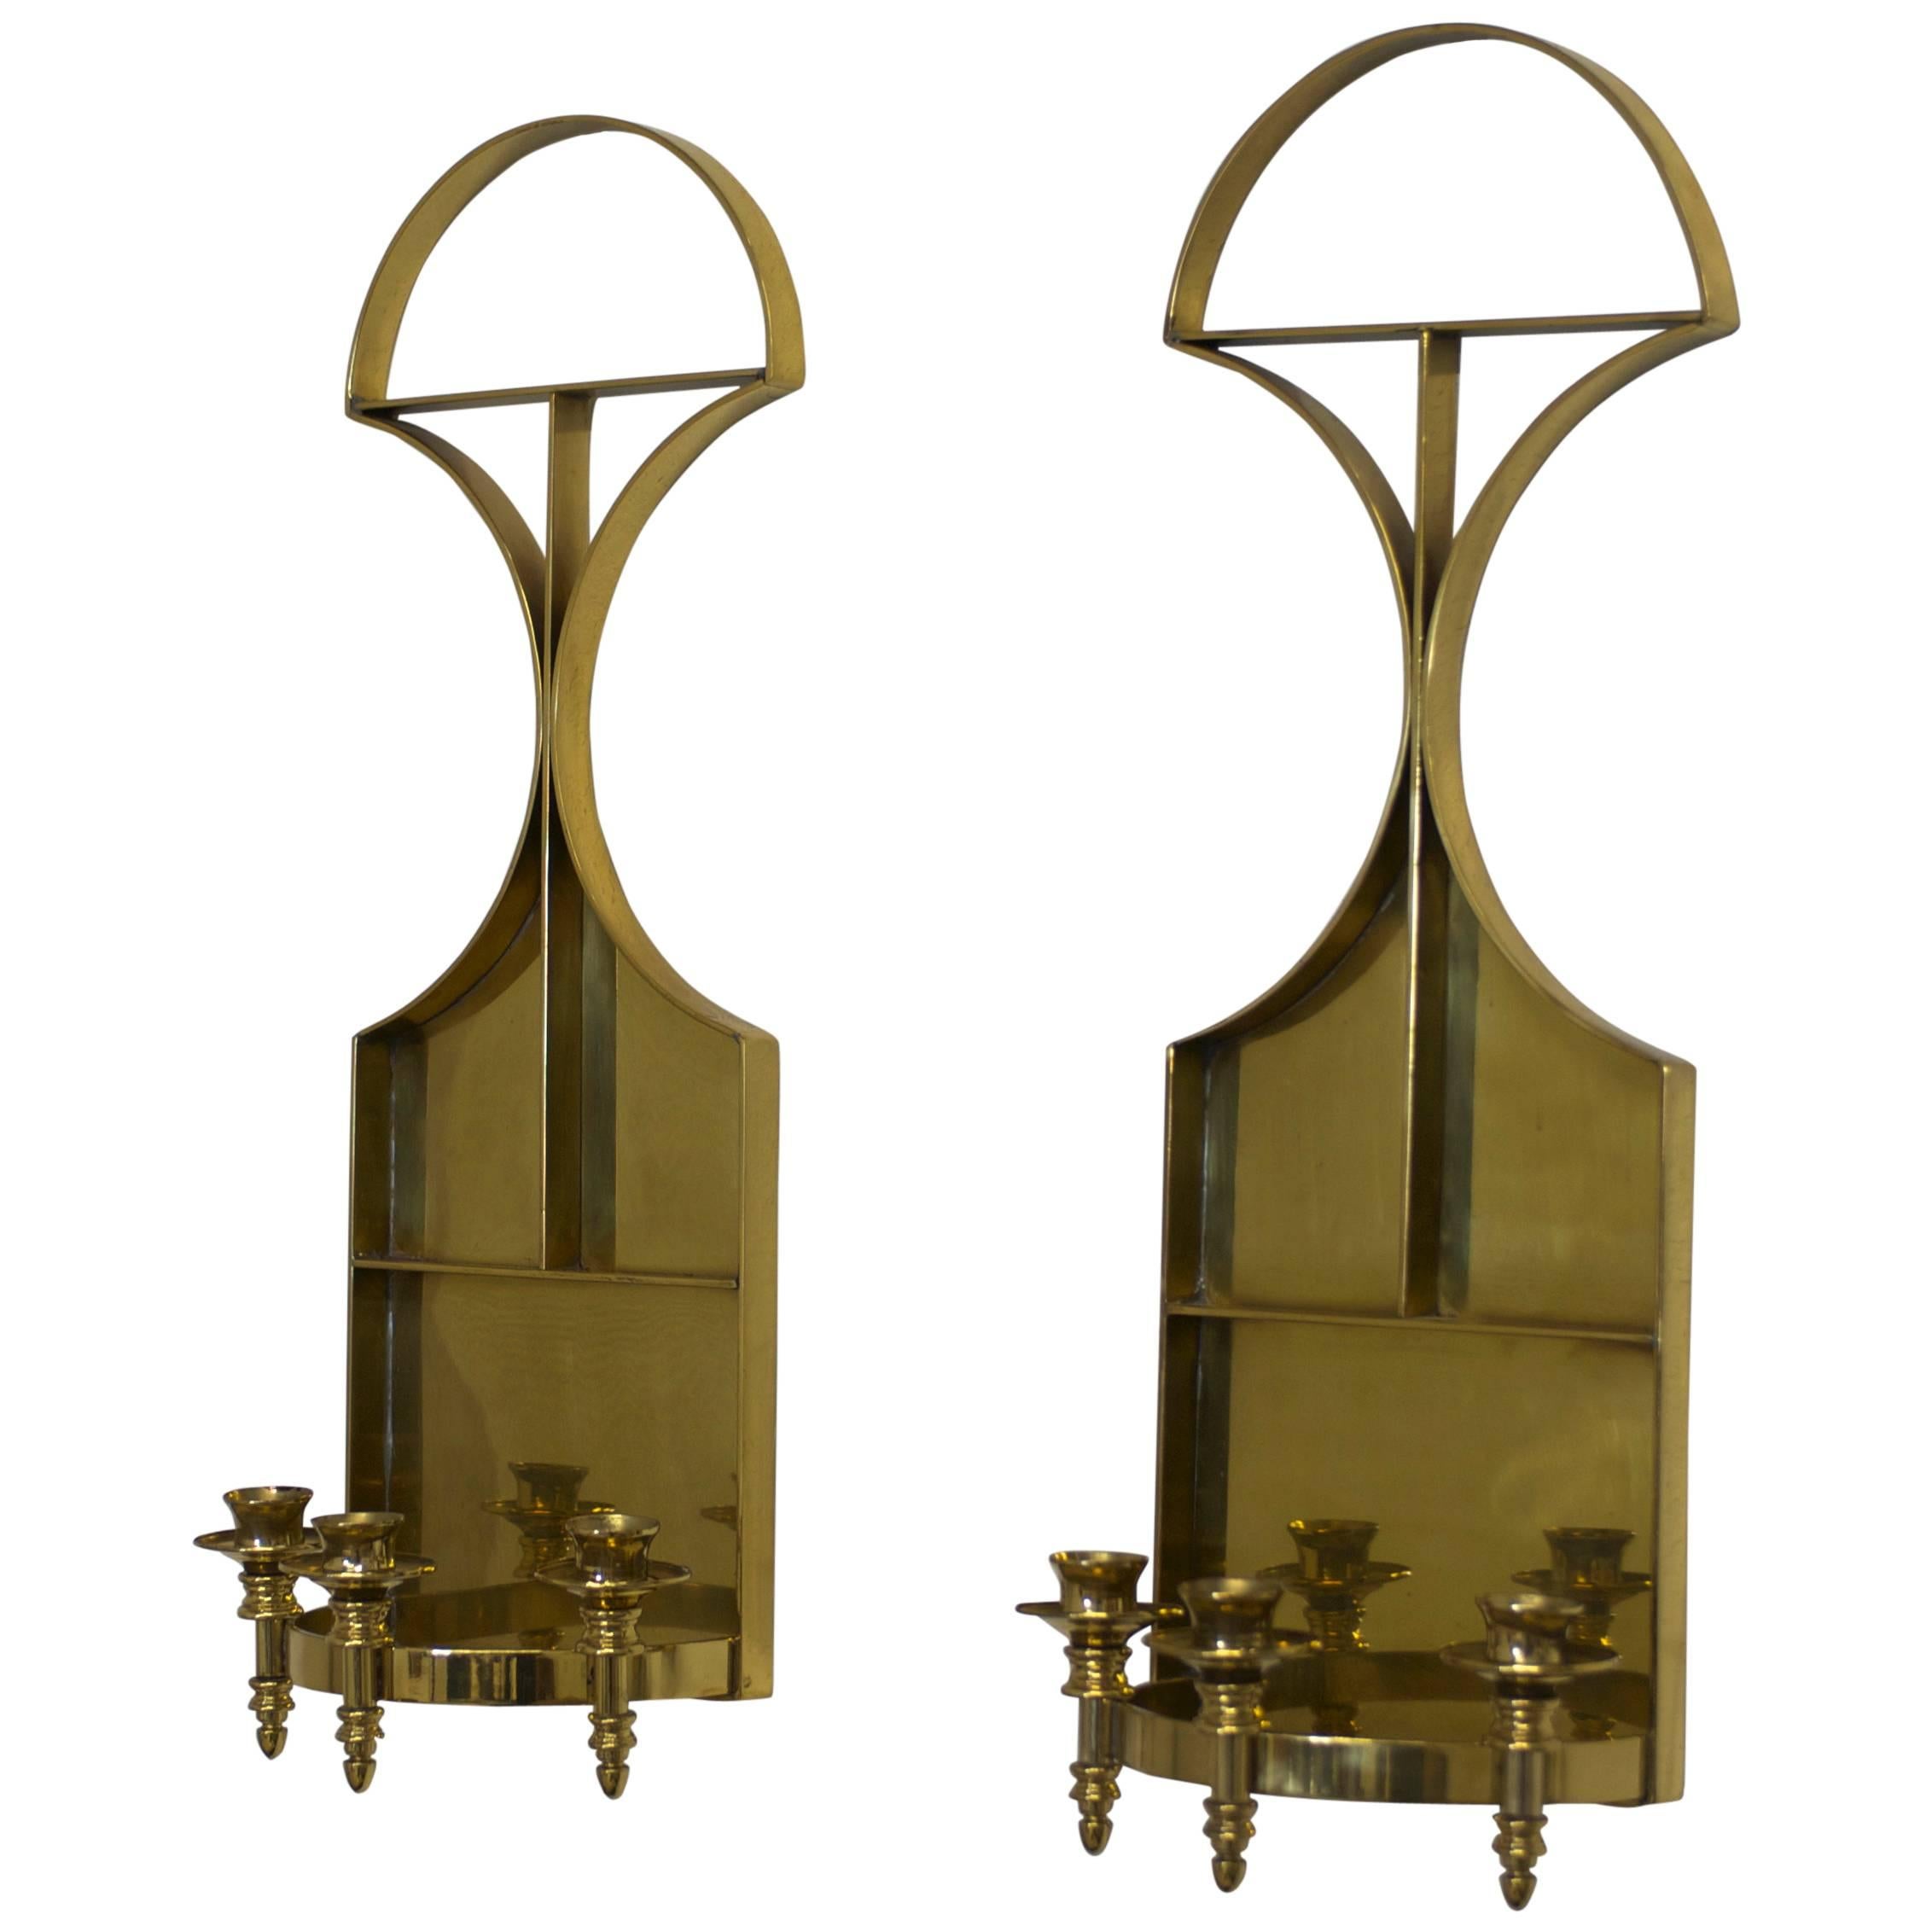 Pair of Solid Brass Mid-Century Candle Wall Sconces For Sale